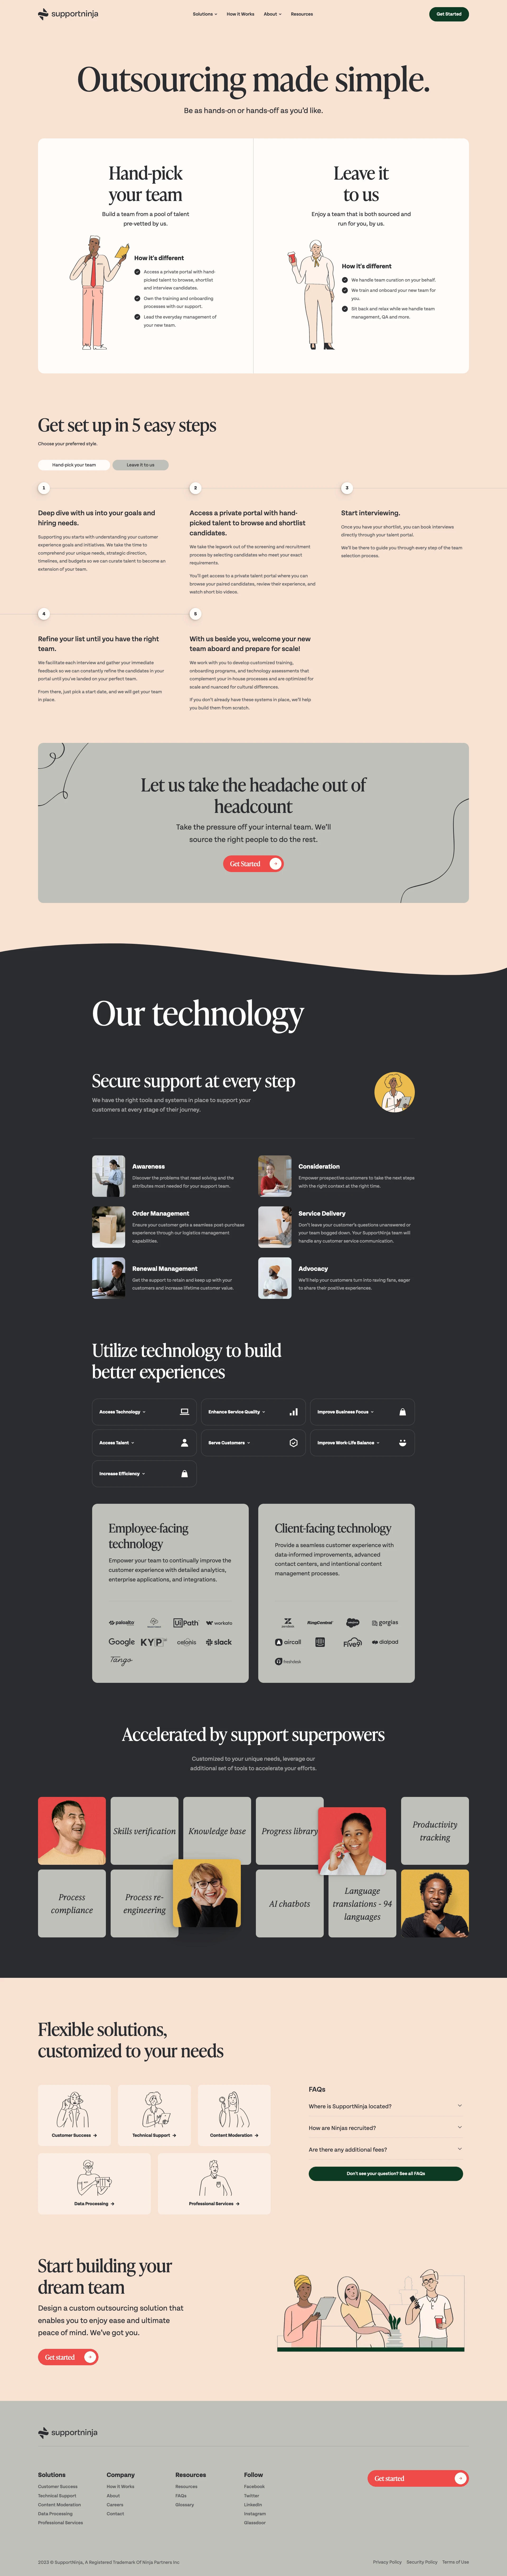 SupportNinja Landing Page Example: Growth can be a great problem to have - as long as you have the right team. We're the right-size partner who'll prove that our culture isn't an empty promise.